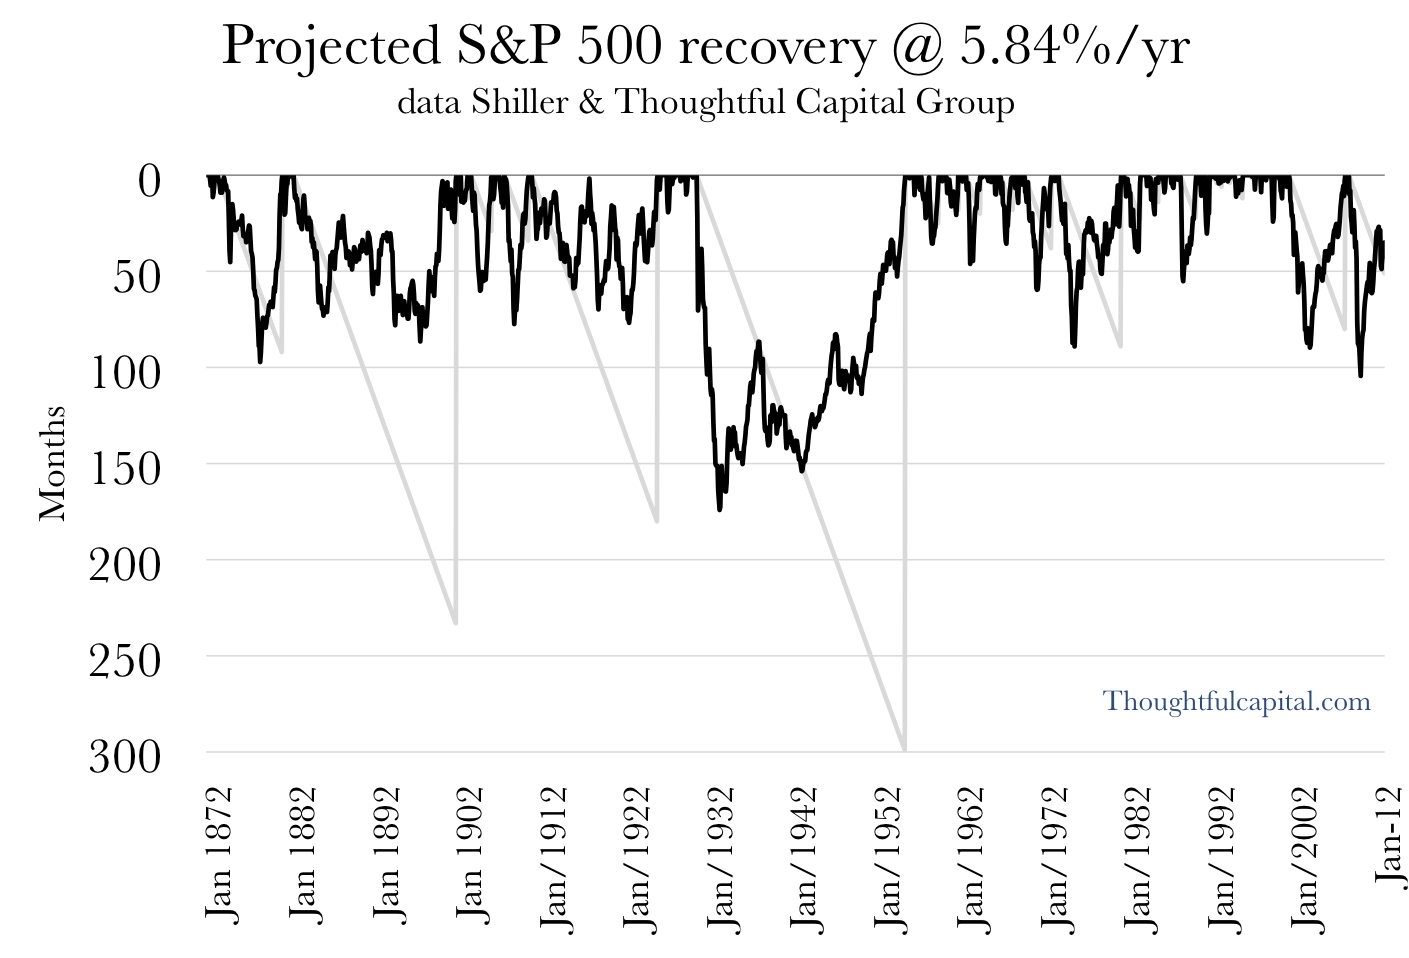 S&P 500 projected recovery in months 1871-2011